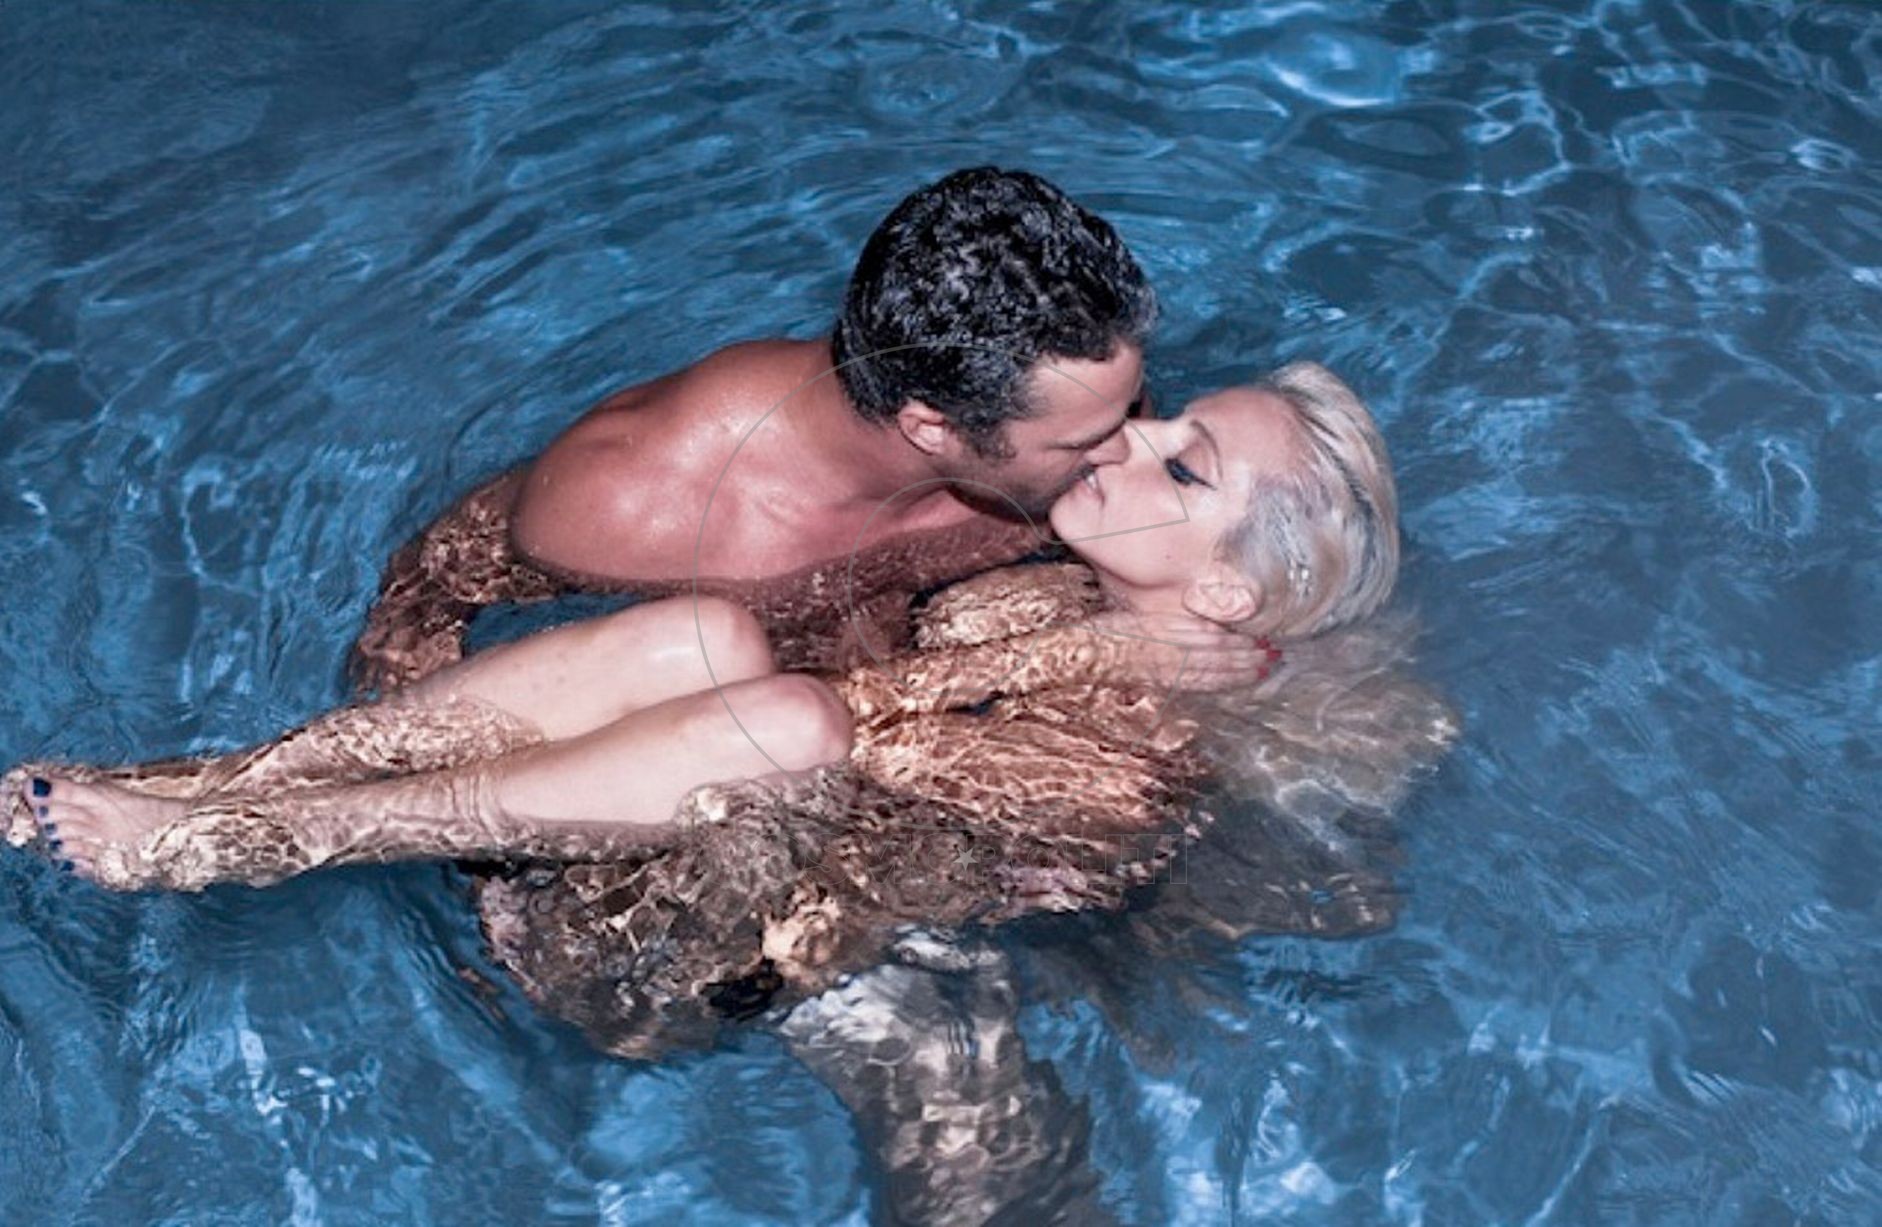 Lady Gaga tweets a picture of herself and boyfriend Taylor Kinney